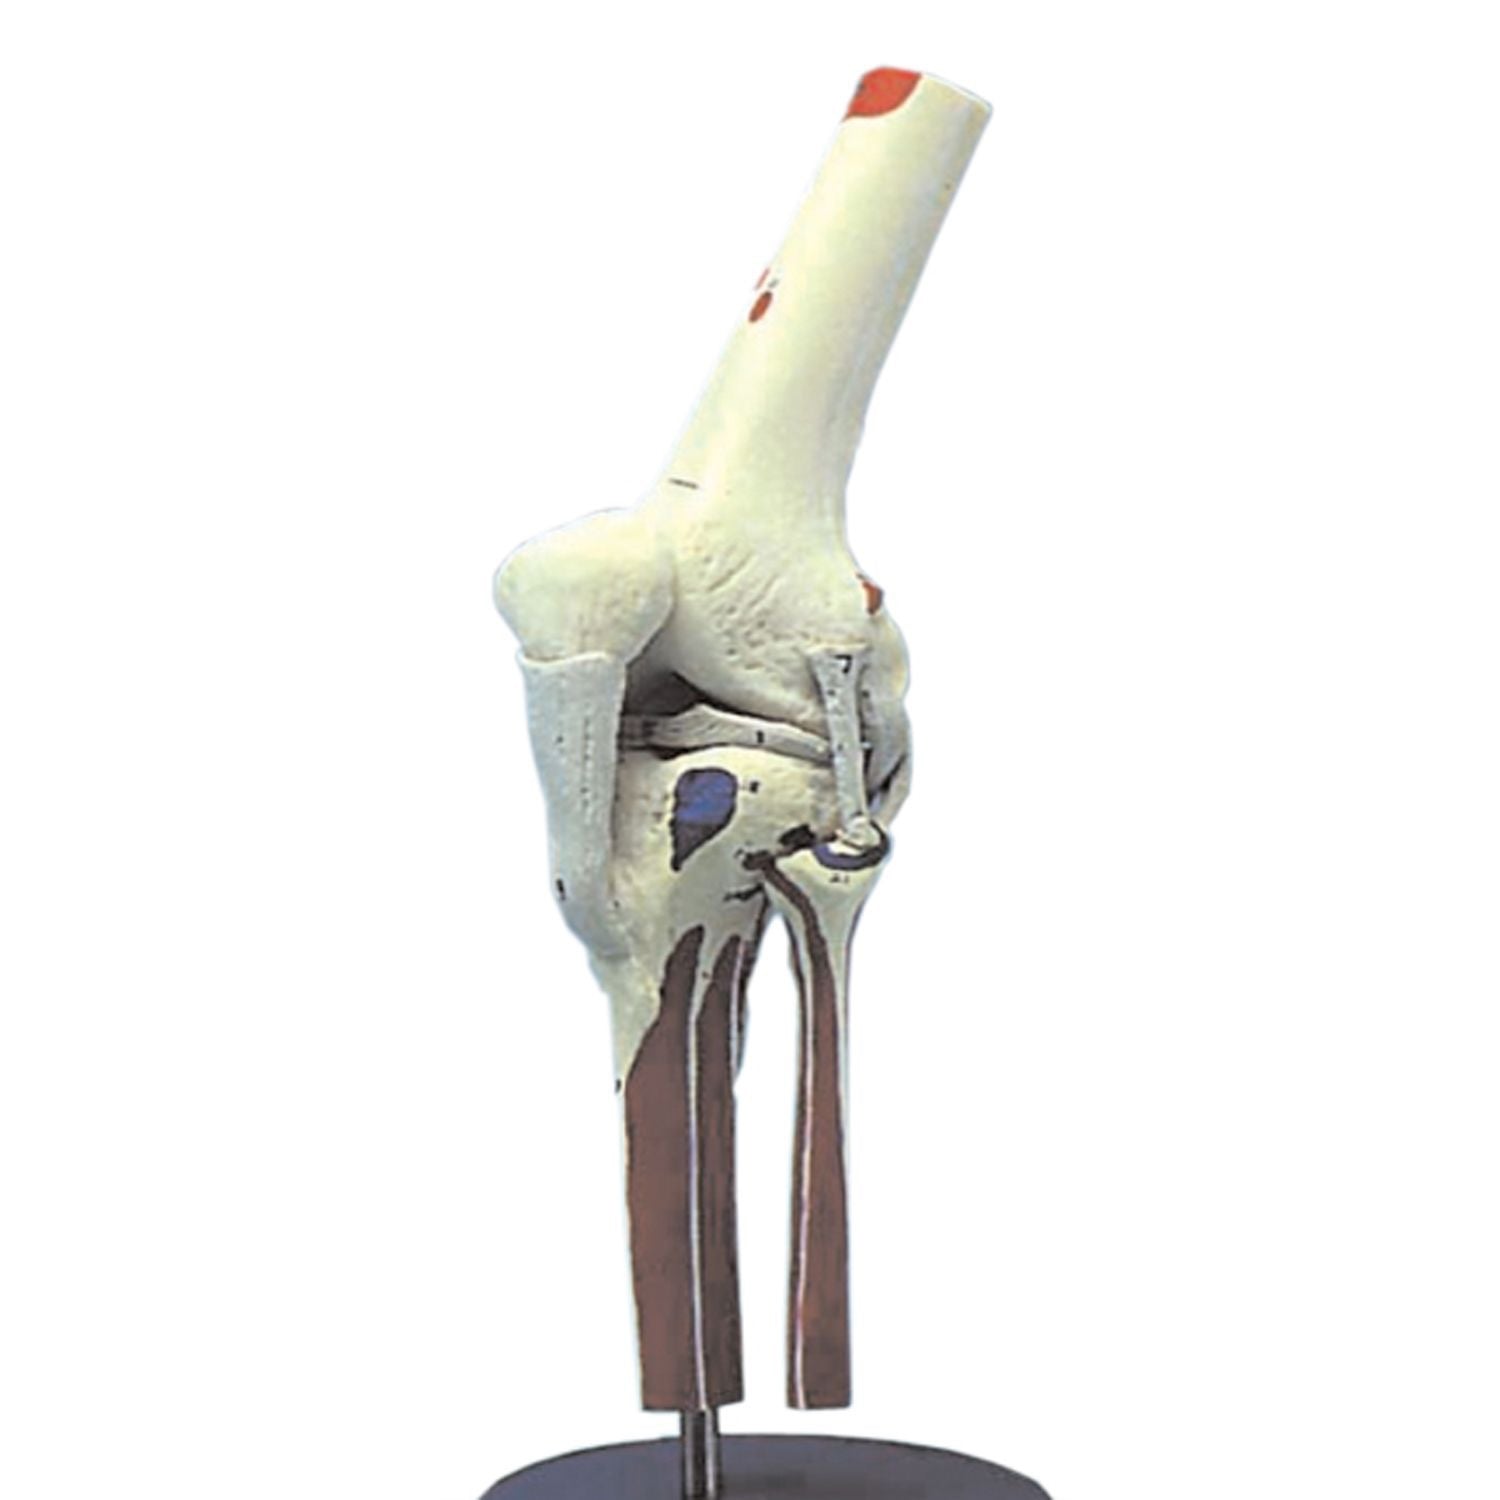 Knee Joint - Painted Ligamented